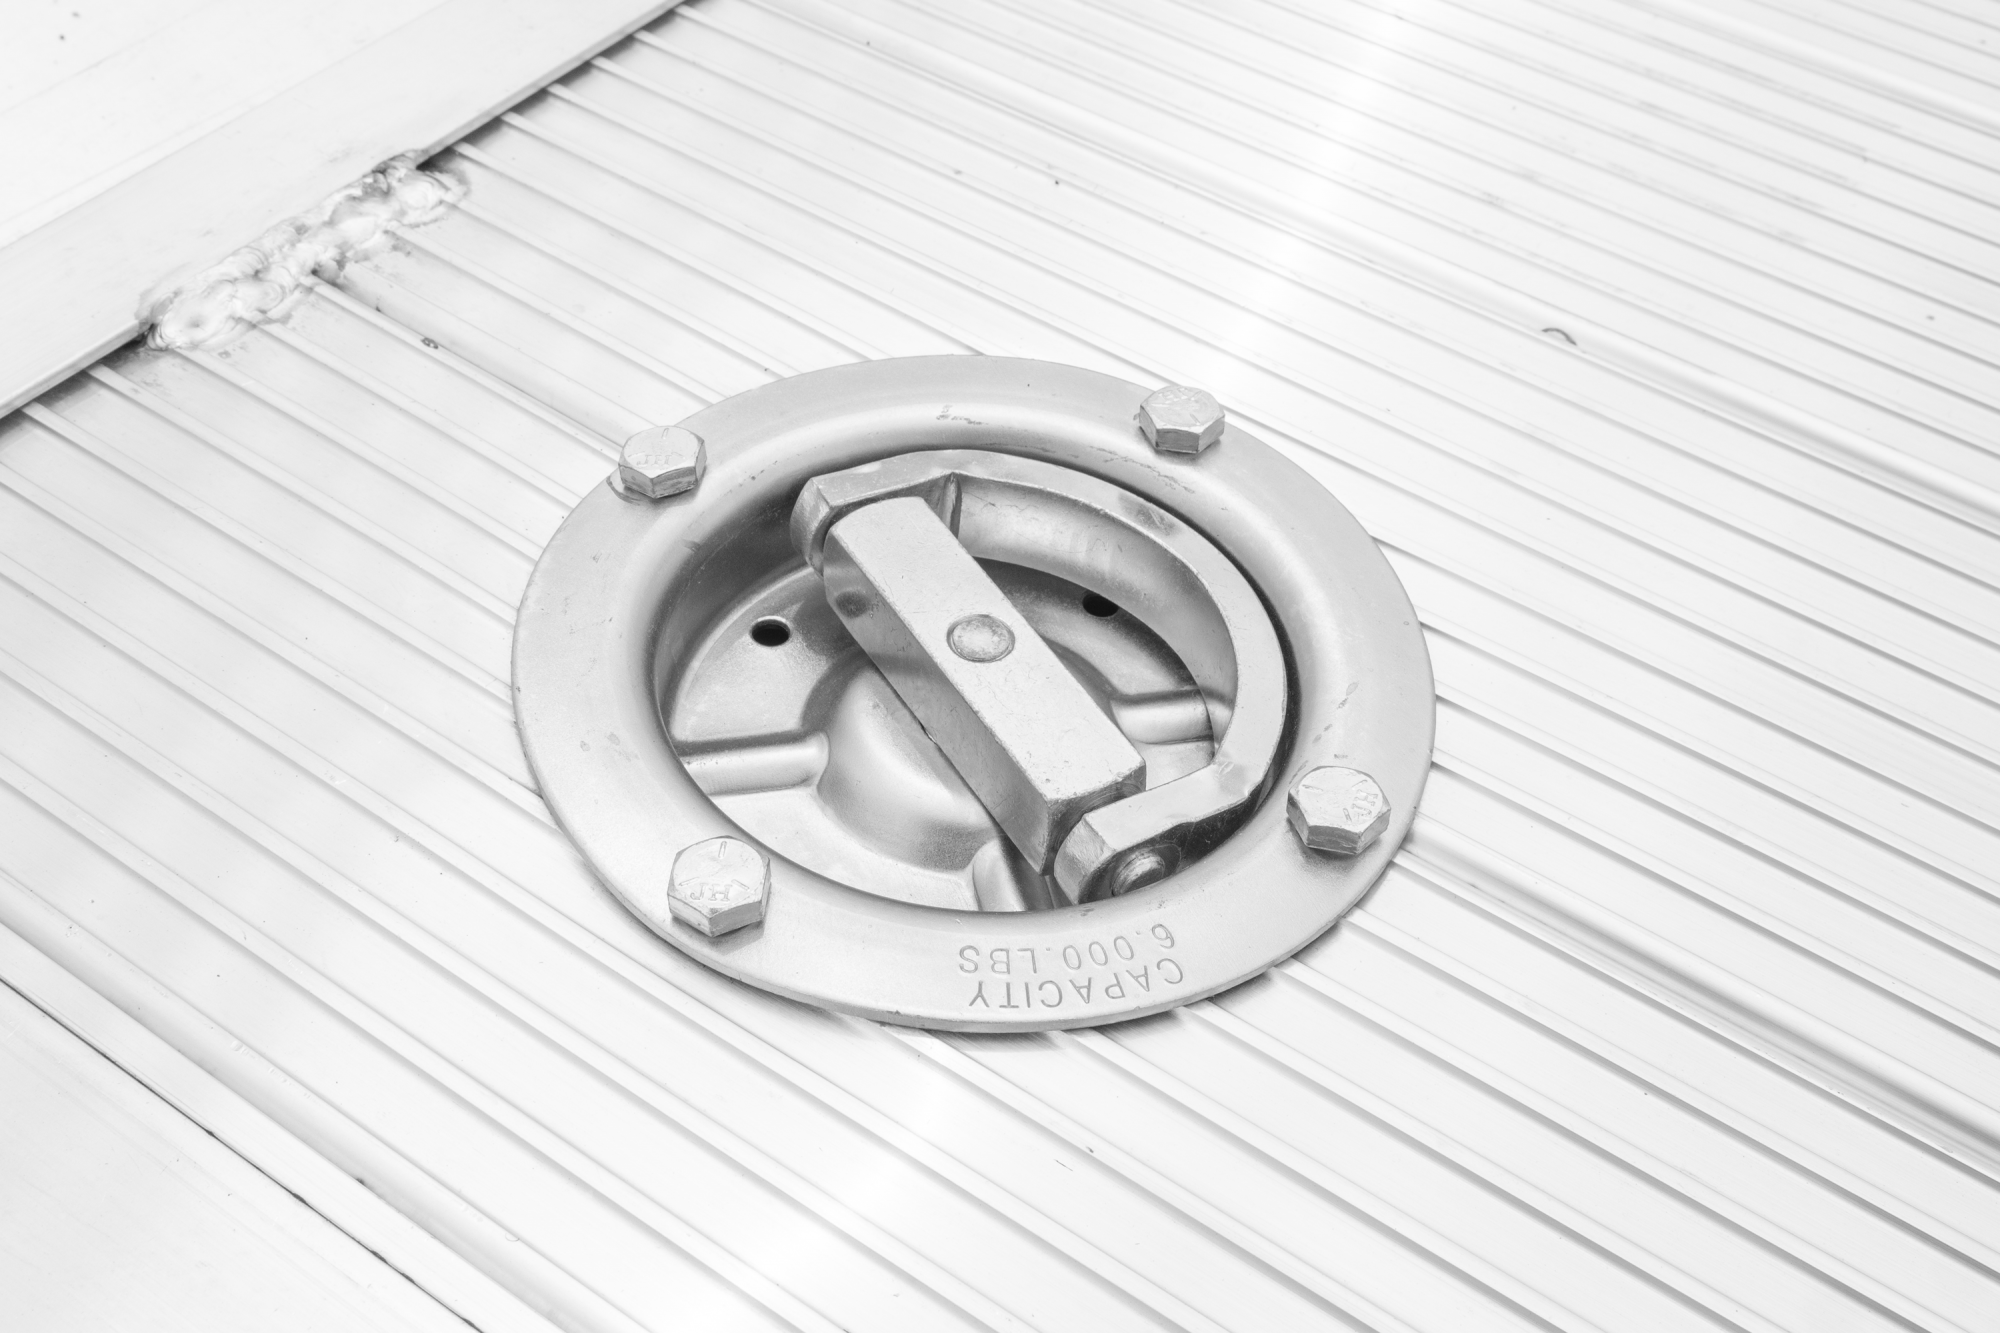 Sure-Trac | Image | Close-Up of the Recessed D-rings on the Sure-Trac Aluminum Equipment Trailer